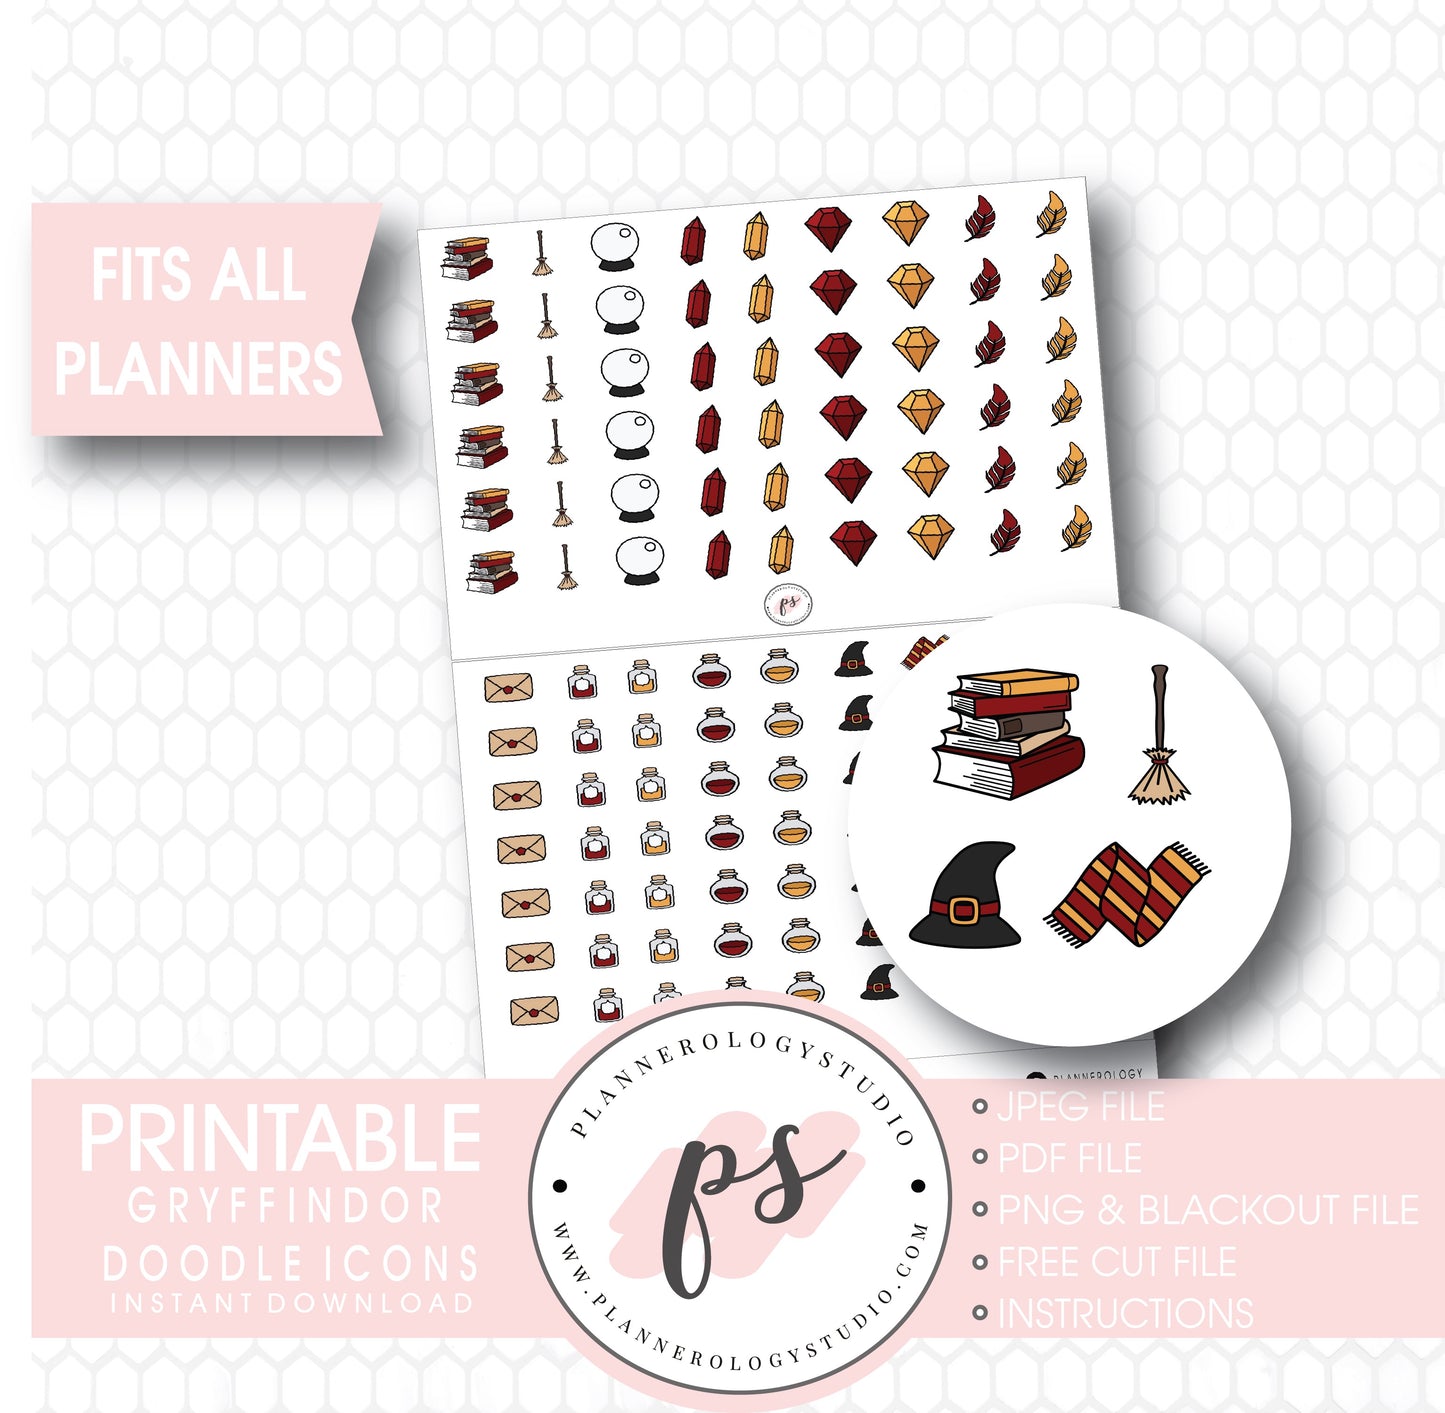 Wizards & Magic (Harry Potter Gryffindor House) Doodle Icons Digital Printable Planner Stickers